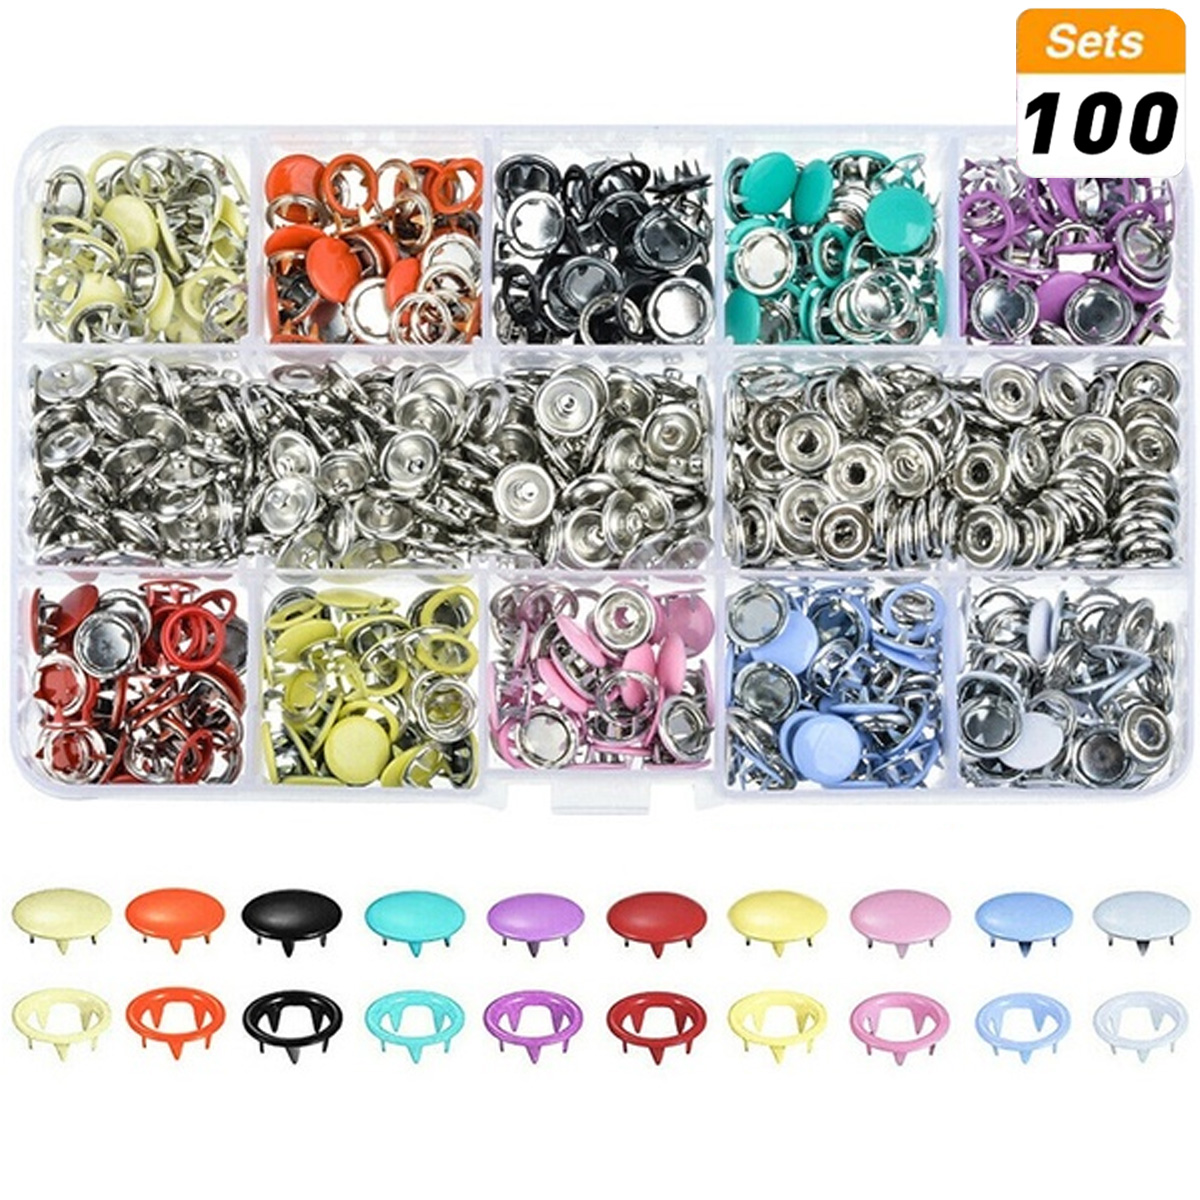 100200-Sets-DIY-Press-Studs-Tools-Kit-Assorted-Colors-Snap-Metal-Sewing-Buttons-1618875-1